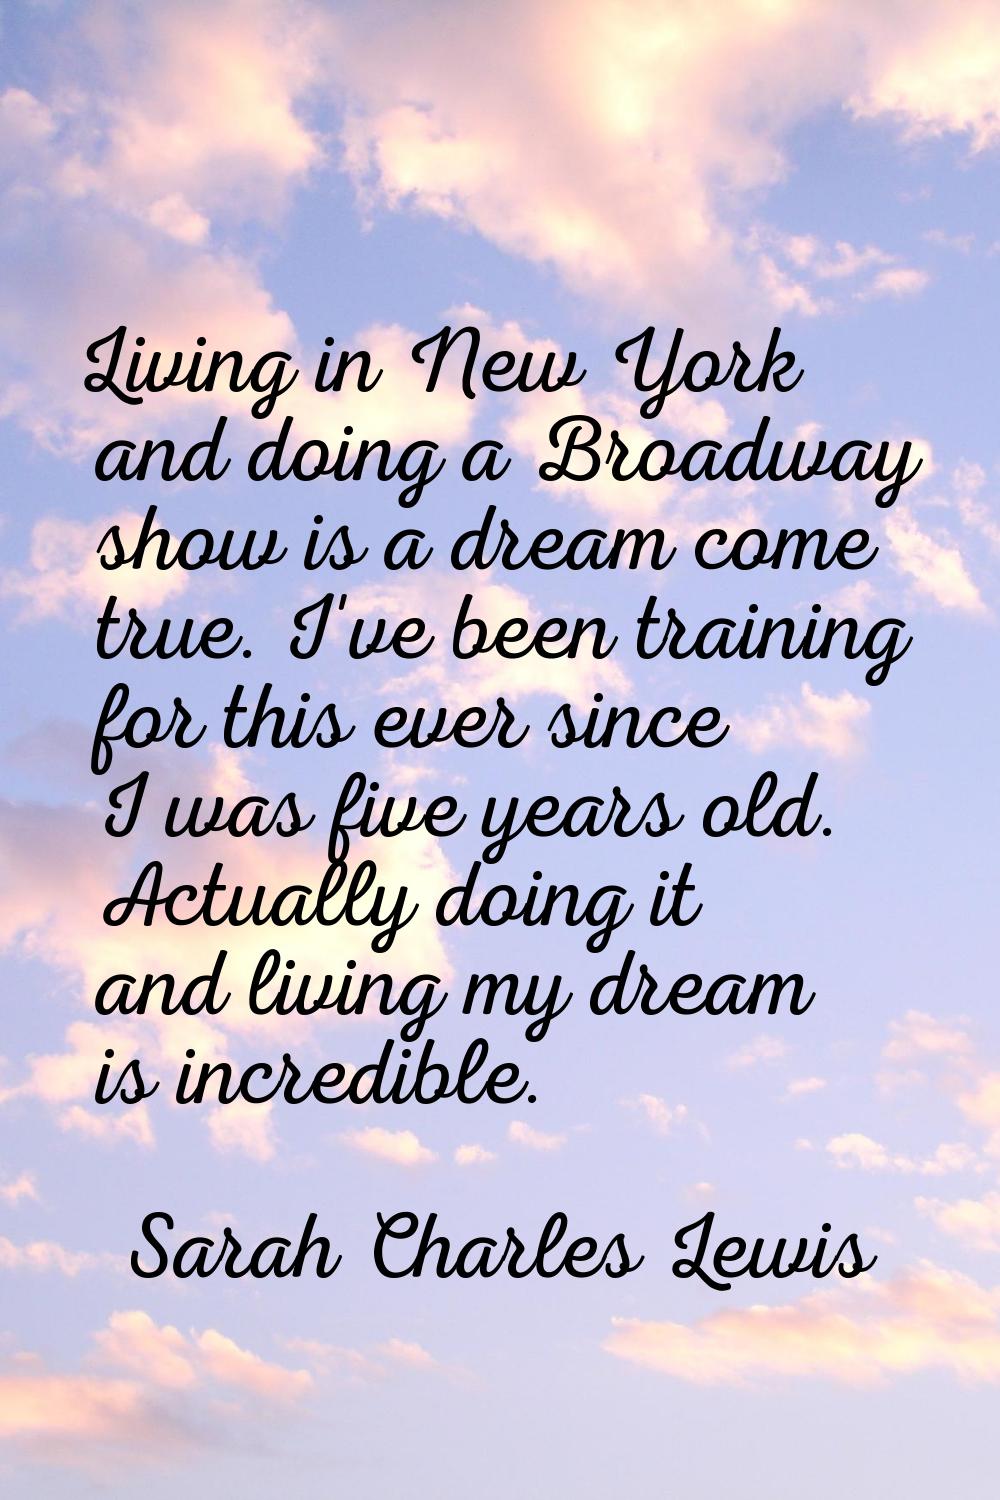 Living in New York and doing a Broadway show is a dream come true. I've been training for this ever